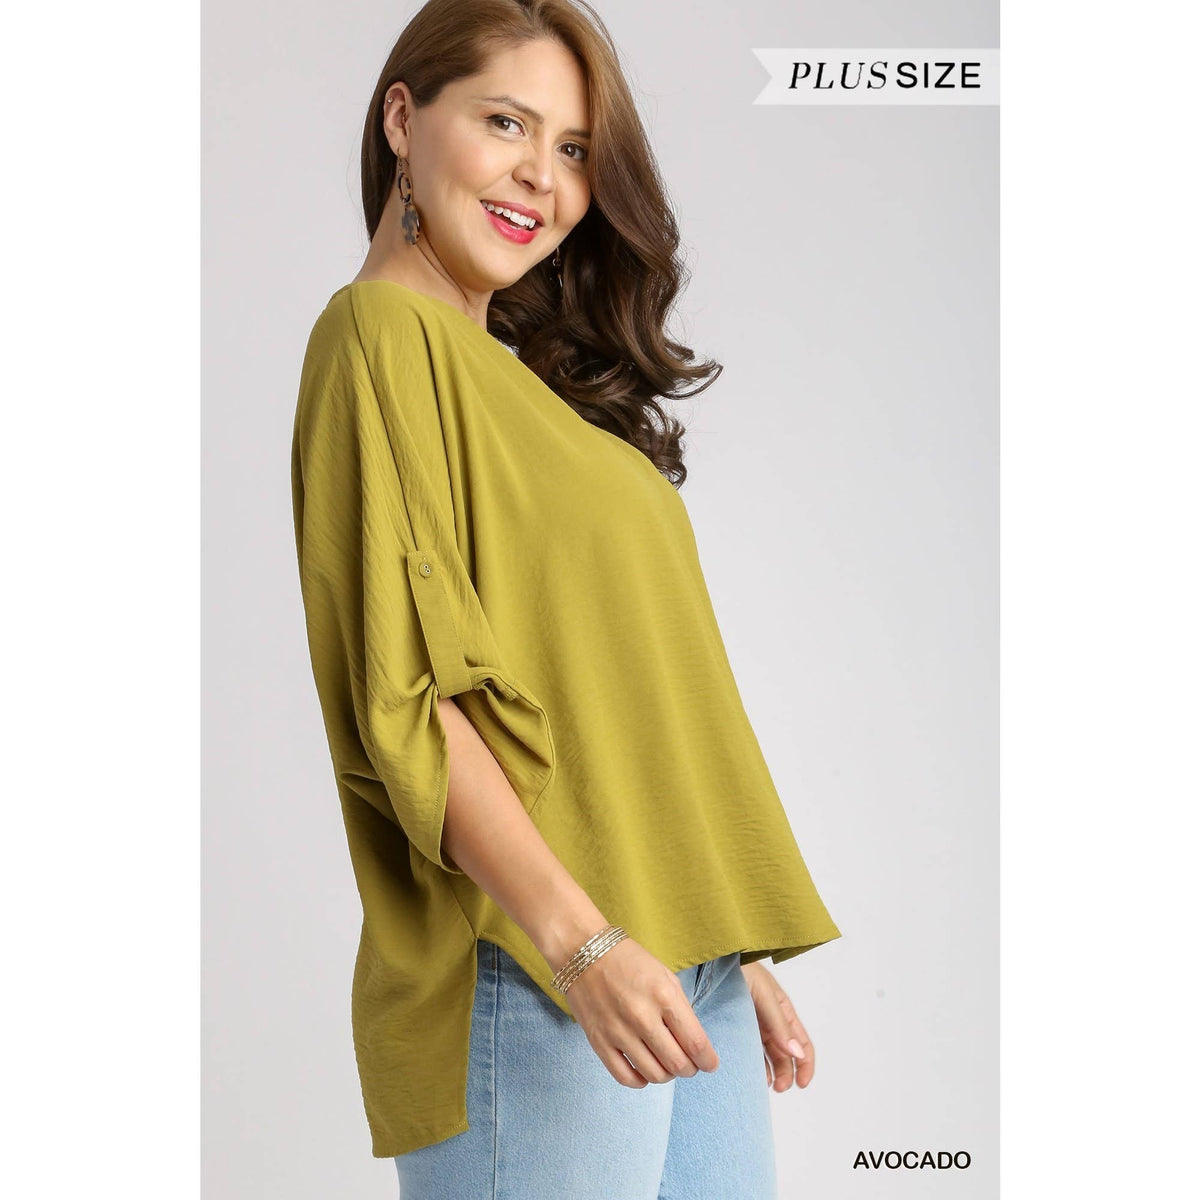 PLUS Solid Boxy Cut Over Sized Top